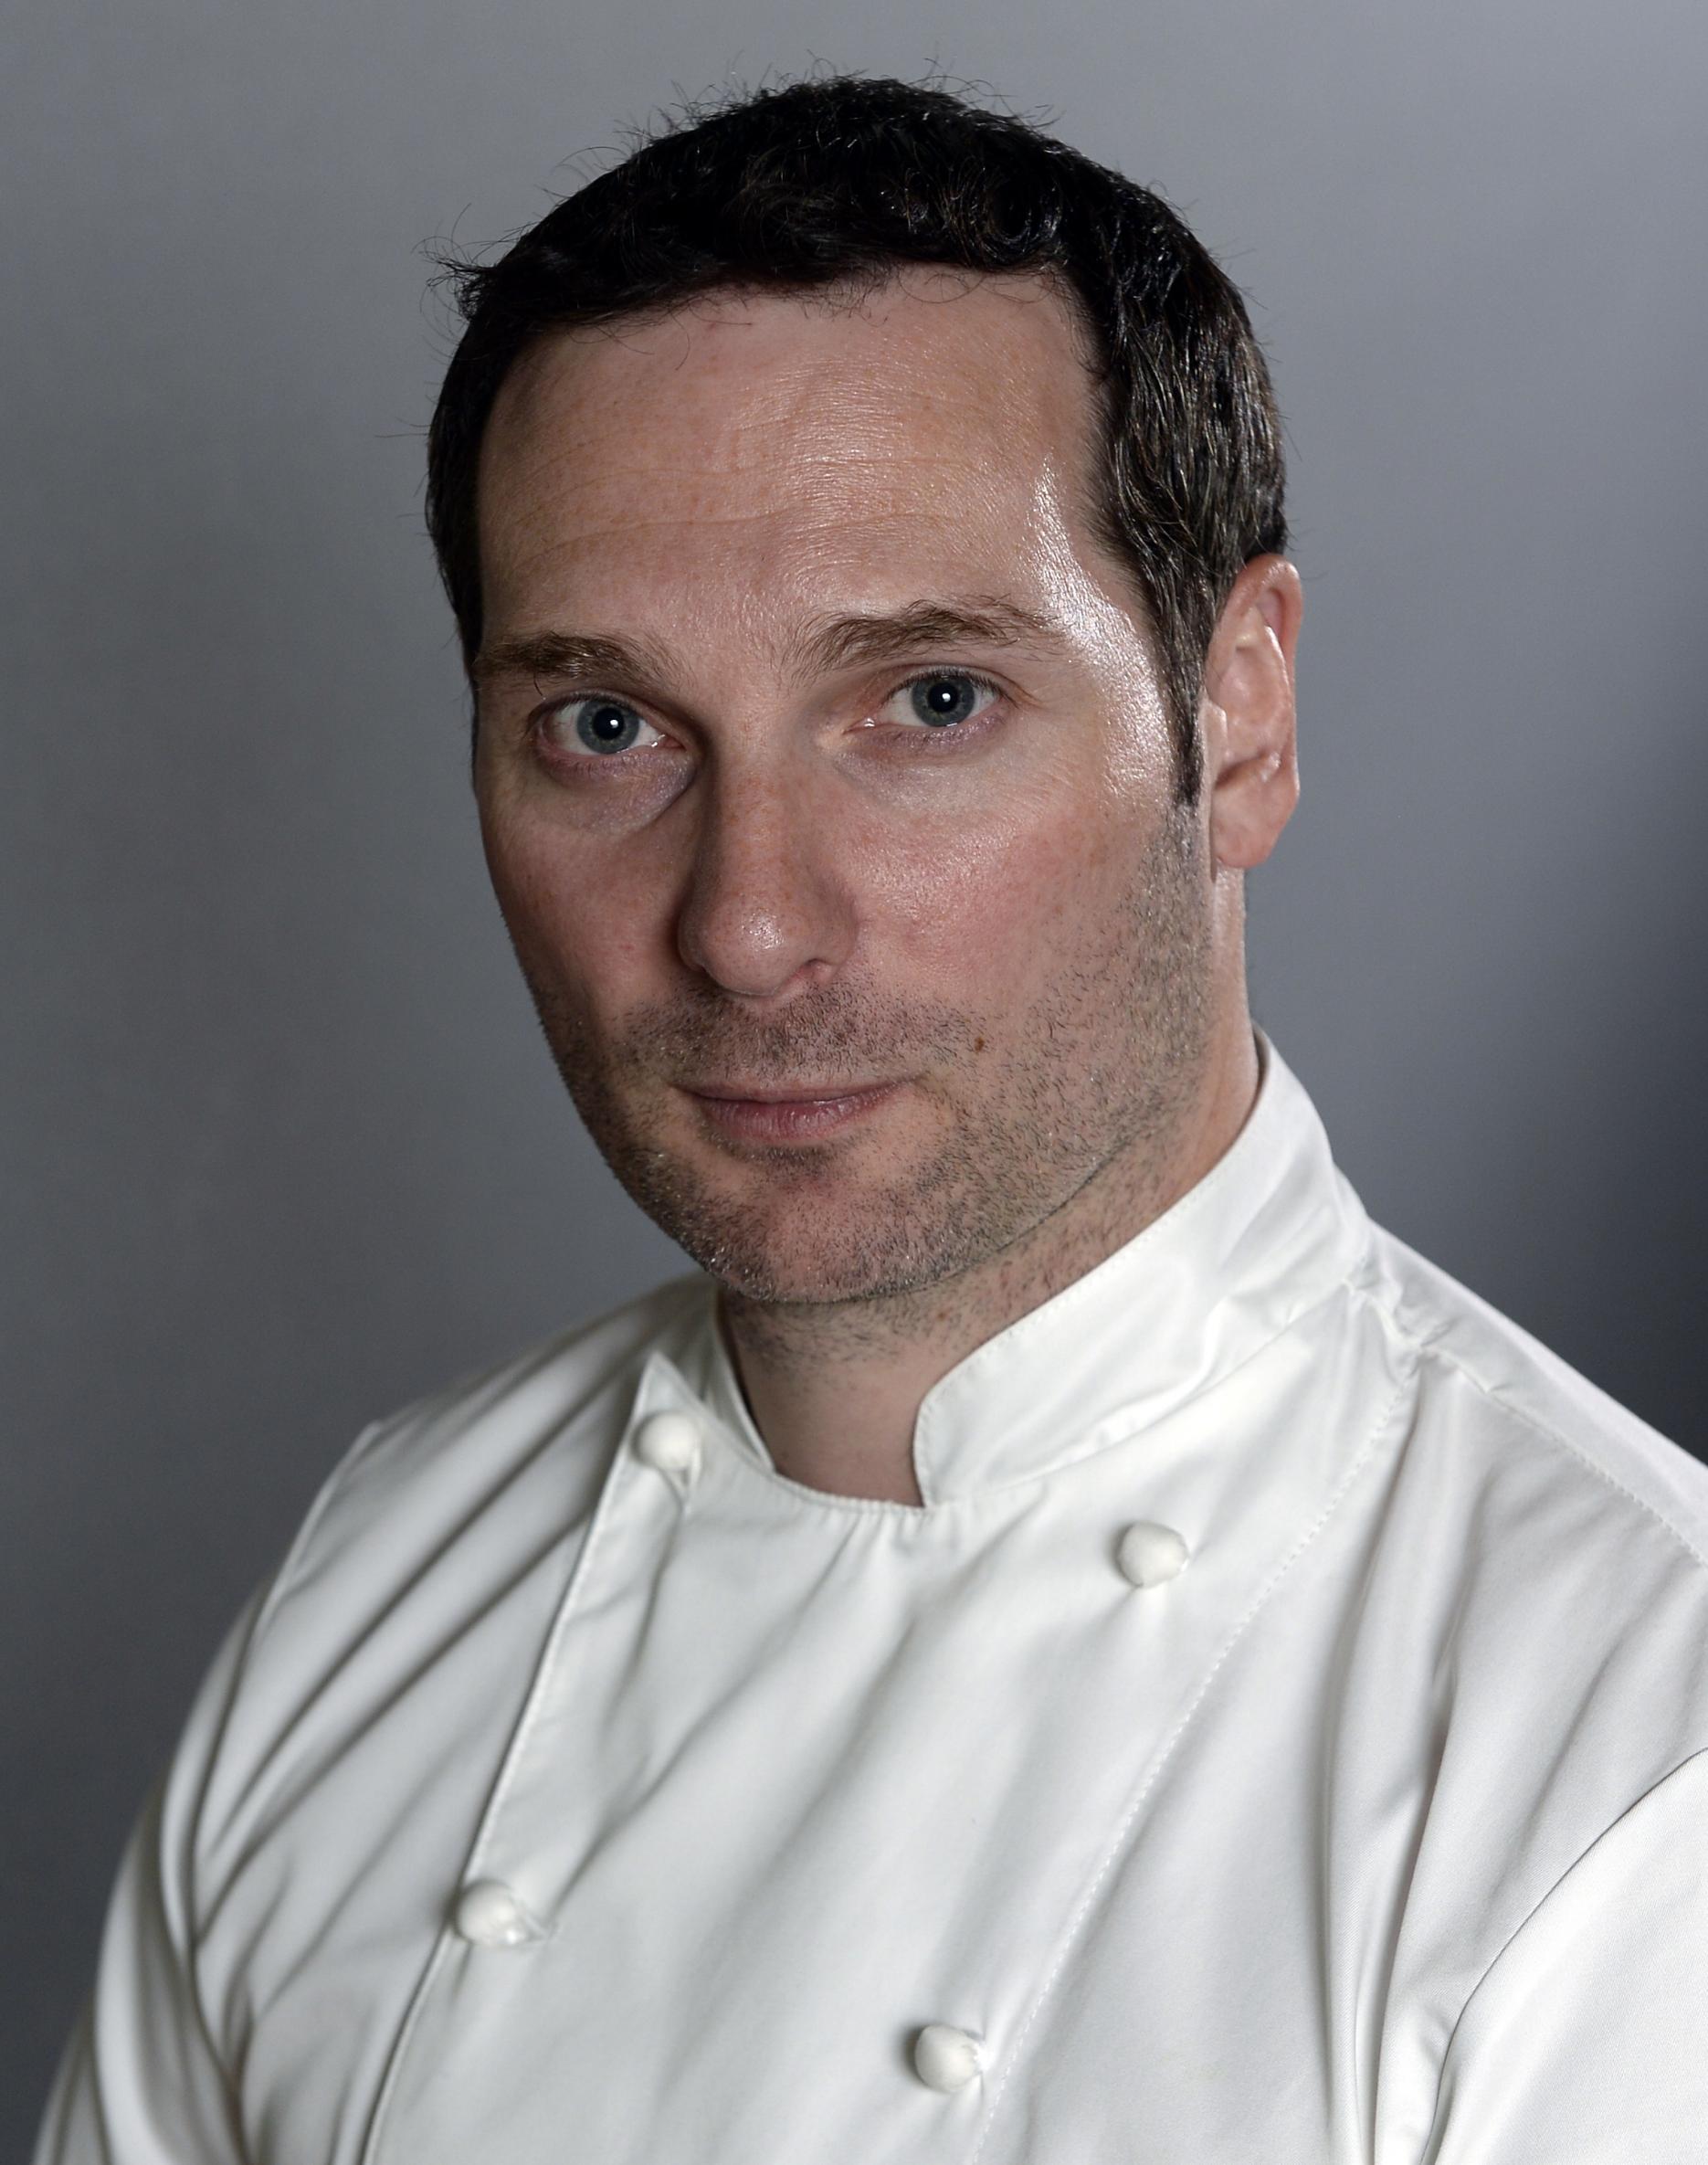 Alpha LSG appoints Michelin star chef Kevin Love to head up culinary academy